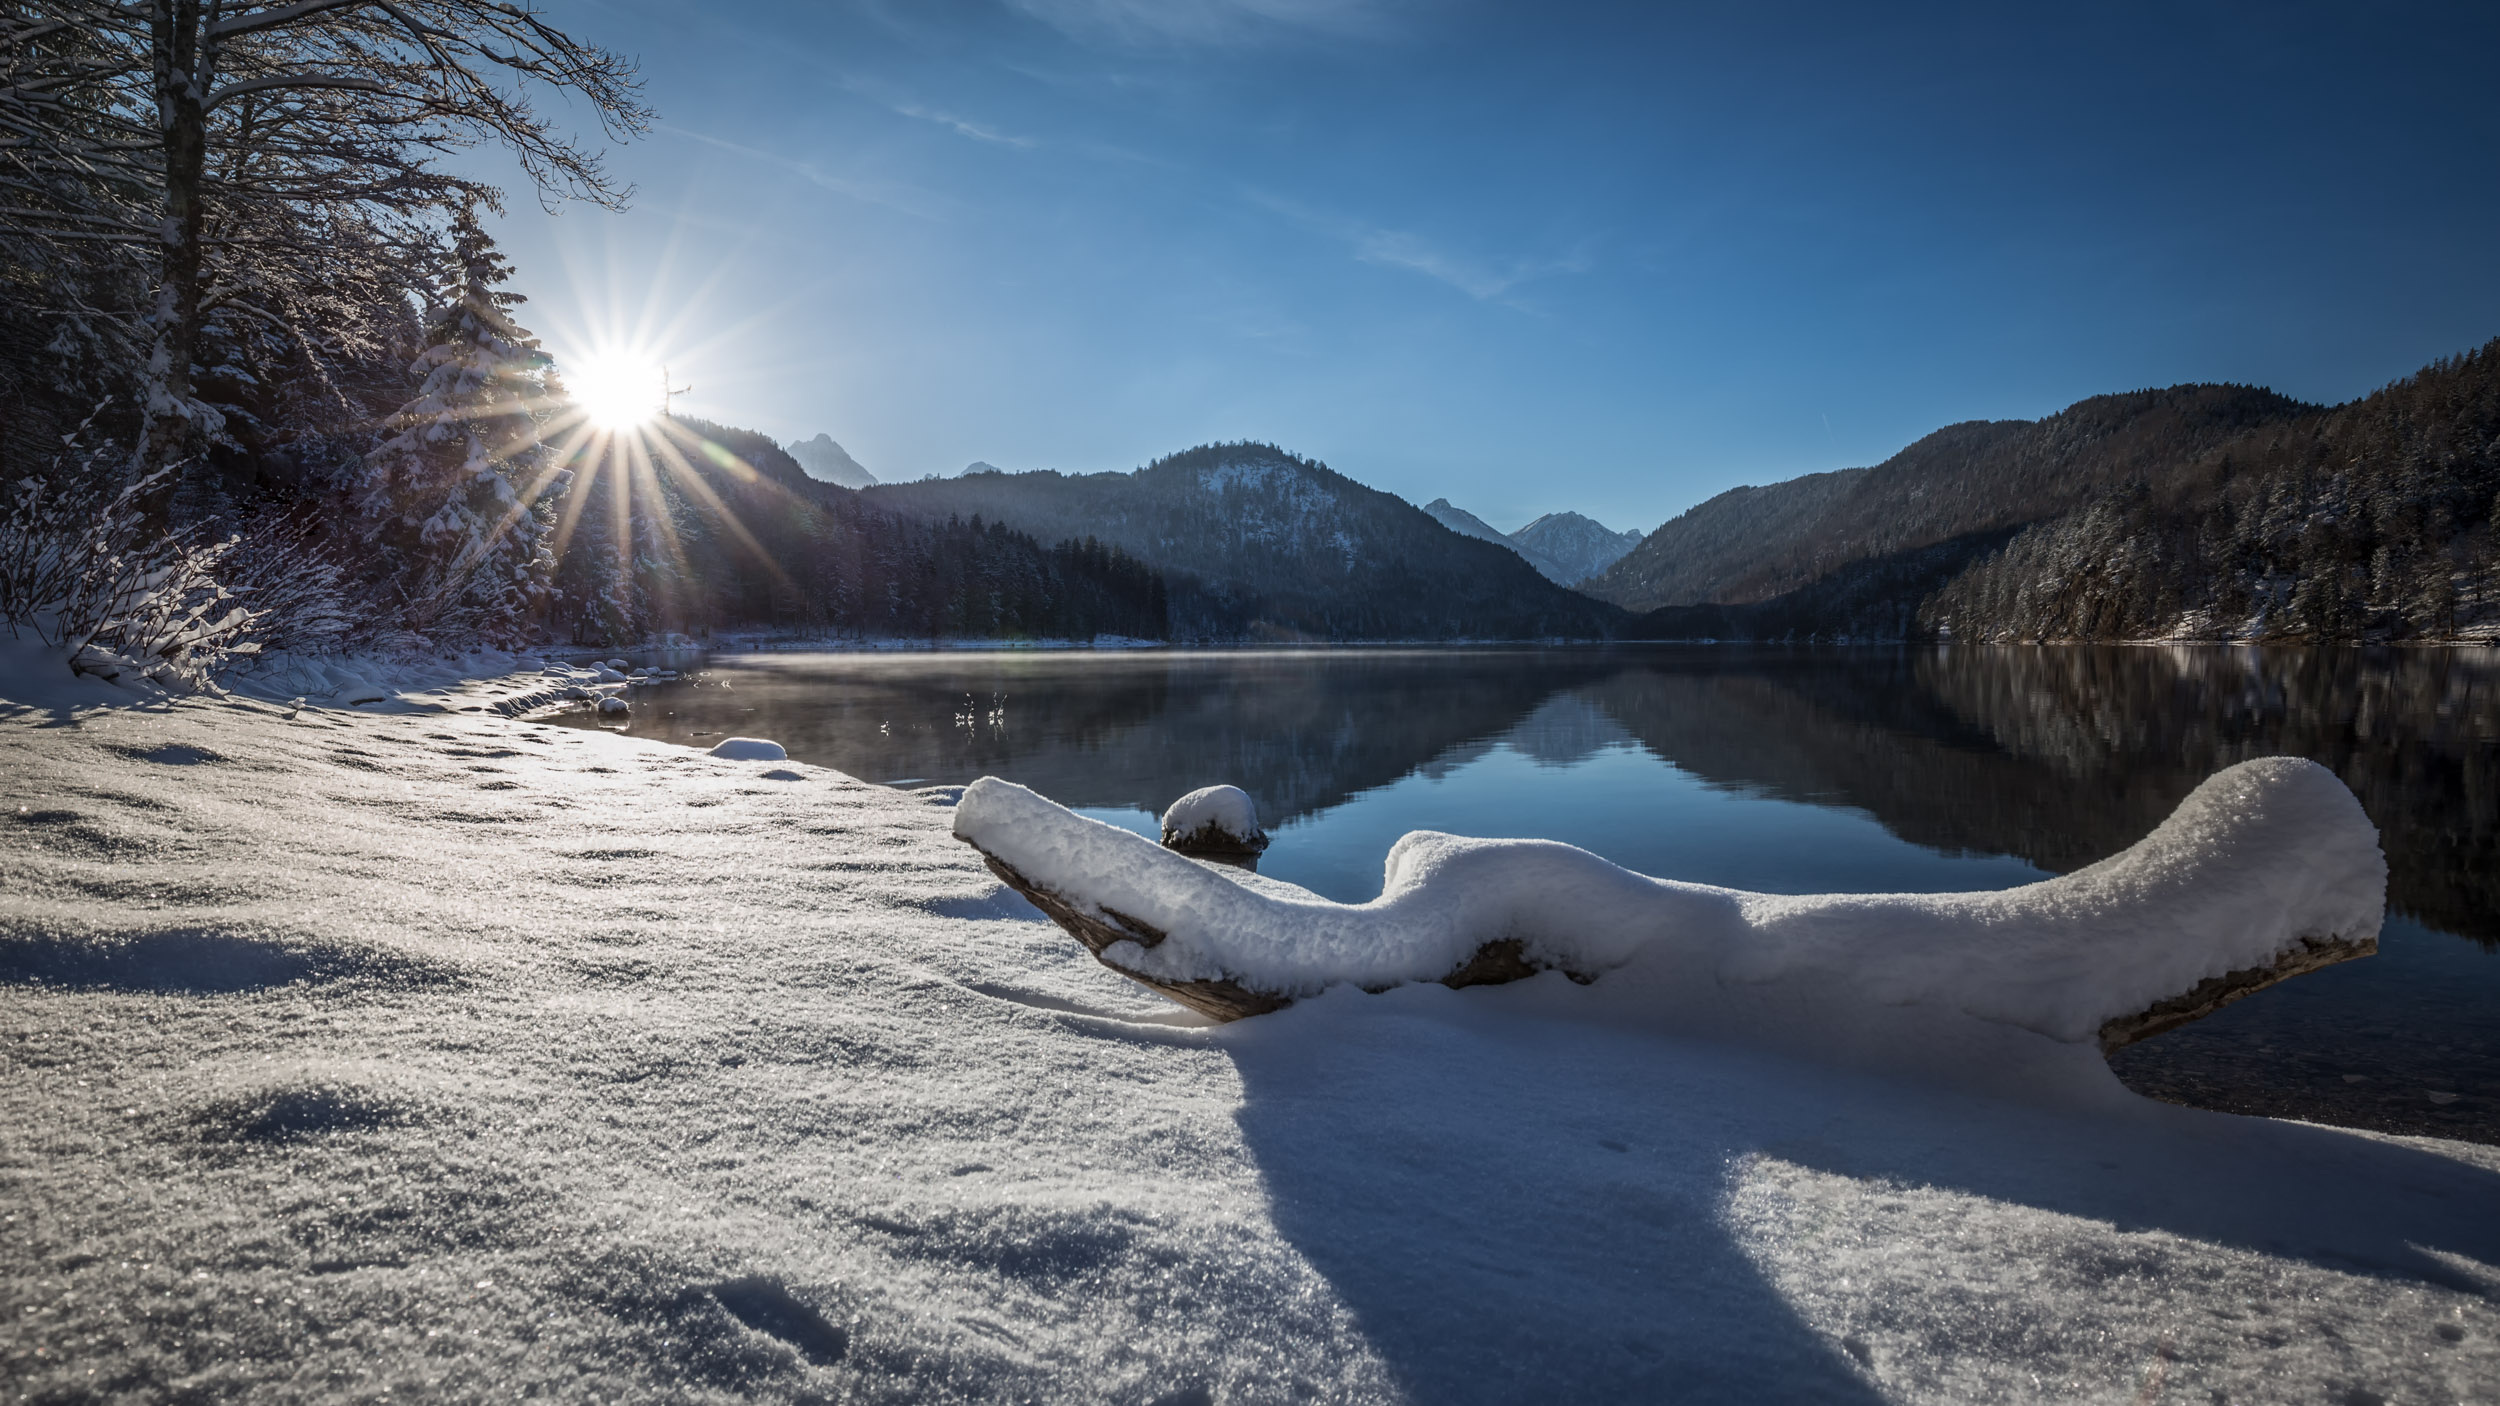 Sunlight at the Alpsee, Germany.